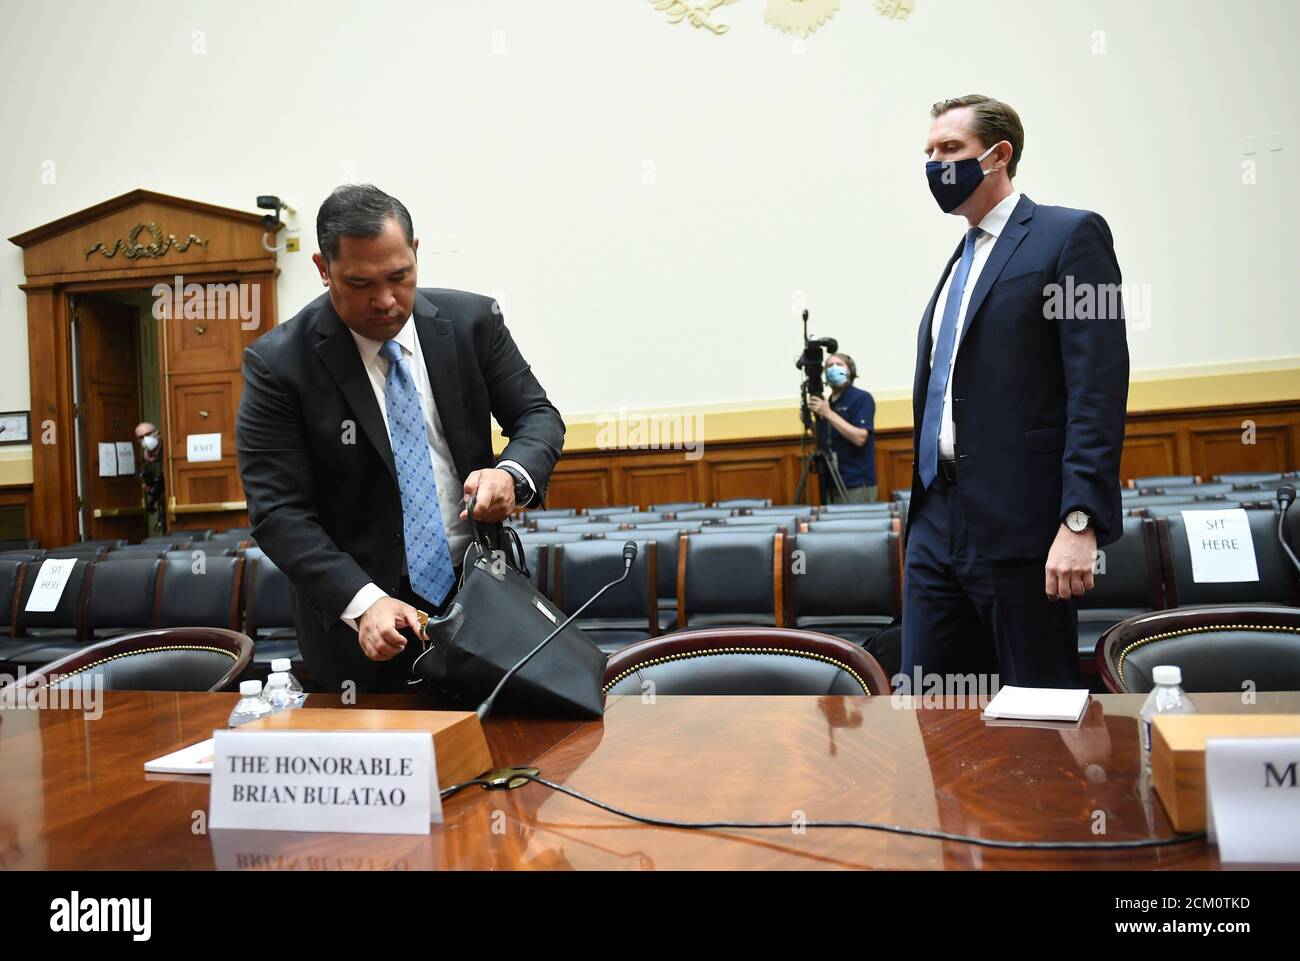 Brian Bulatao (L), Under Secretary of State for Management, and Marik String, Acting Legal Adviser for the State Department, pack up after testifying before a House Committee on Foreign Affairs hearing looking into the firing of State Department Inspector General Steven Linick, on Capitol Hill in Washington, DC on Wednesday, September 16, 2020.Credit: Kevin Dietsch/Pool via CNP | usage worldwide Stock Photo